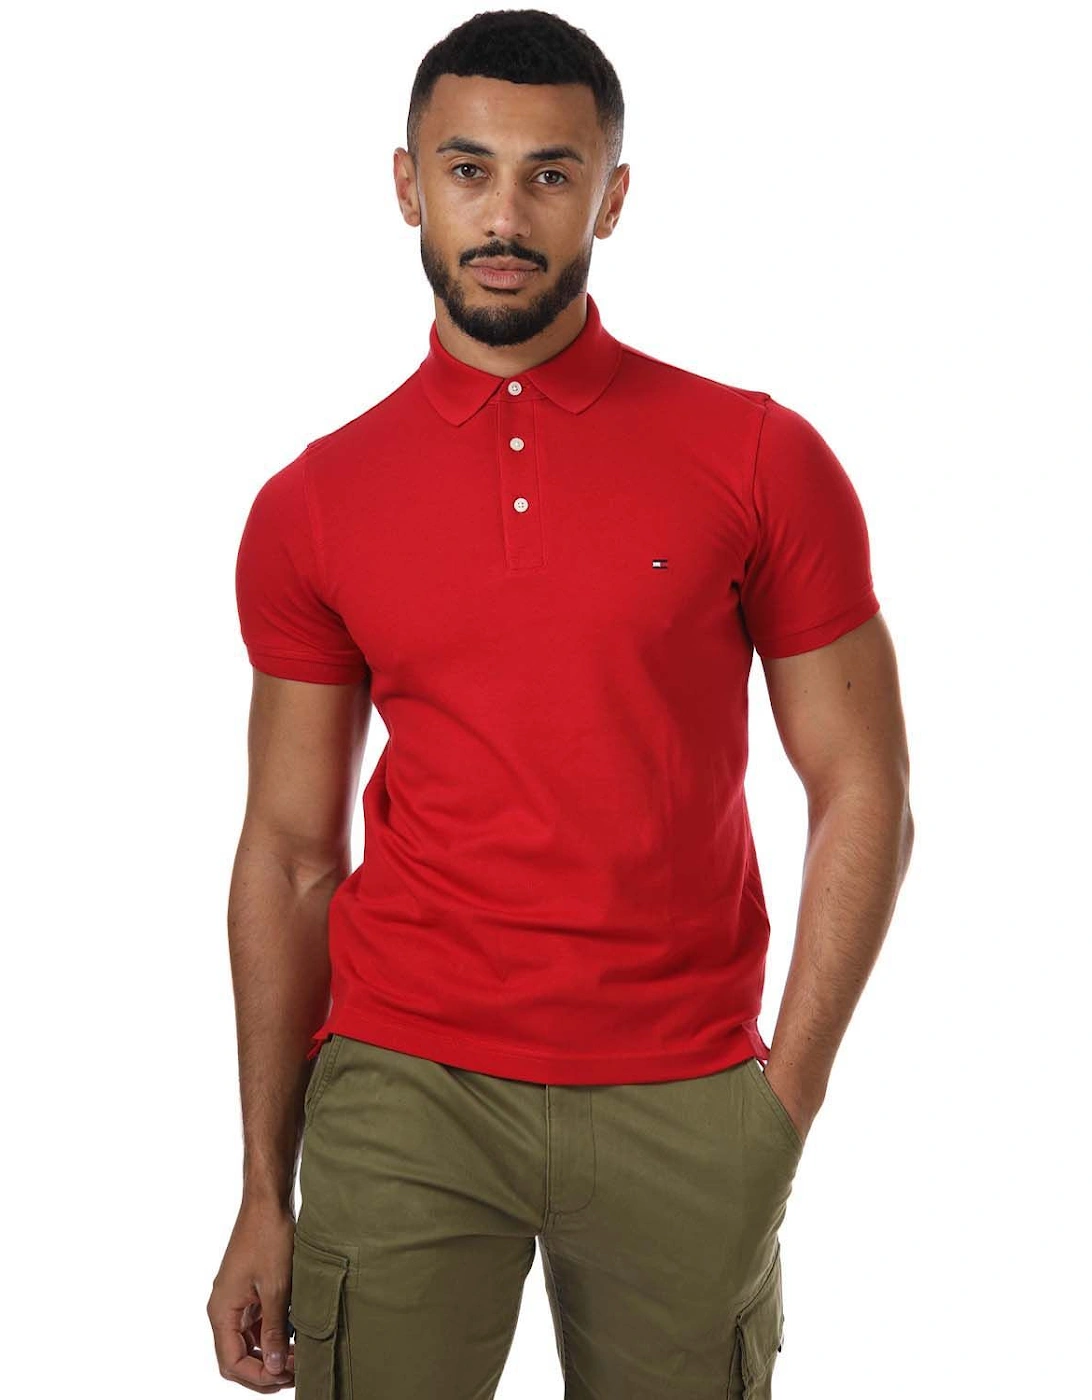 Men's Mens Slim Fit Polo Shirt - Red- [Size: XS only]